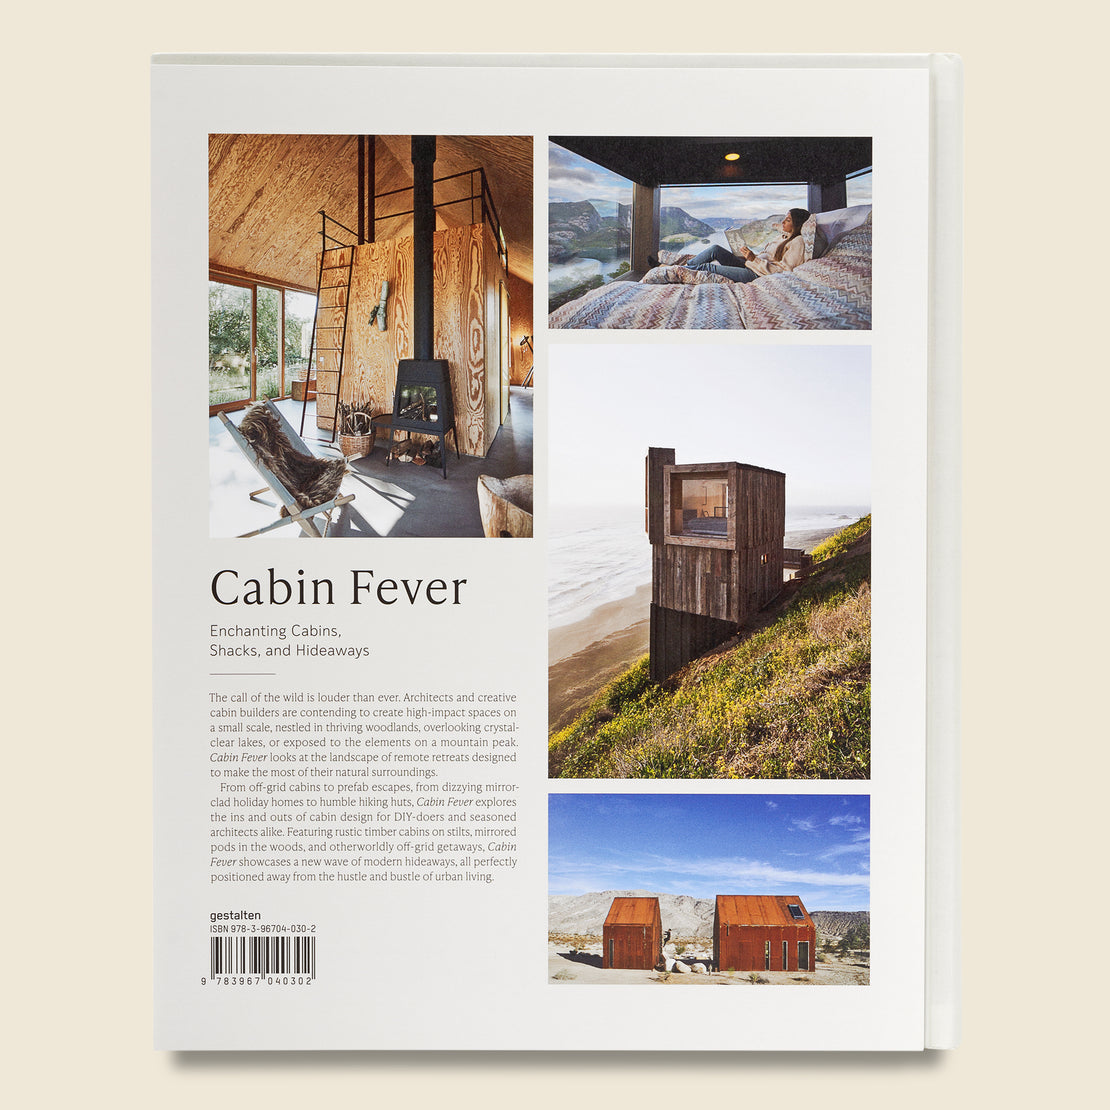 Cabin Fever: Enchanting Cabins, Shacks, and Hideaways - Bookstore - STAG Provisions - Home - Library - Book